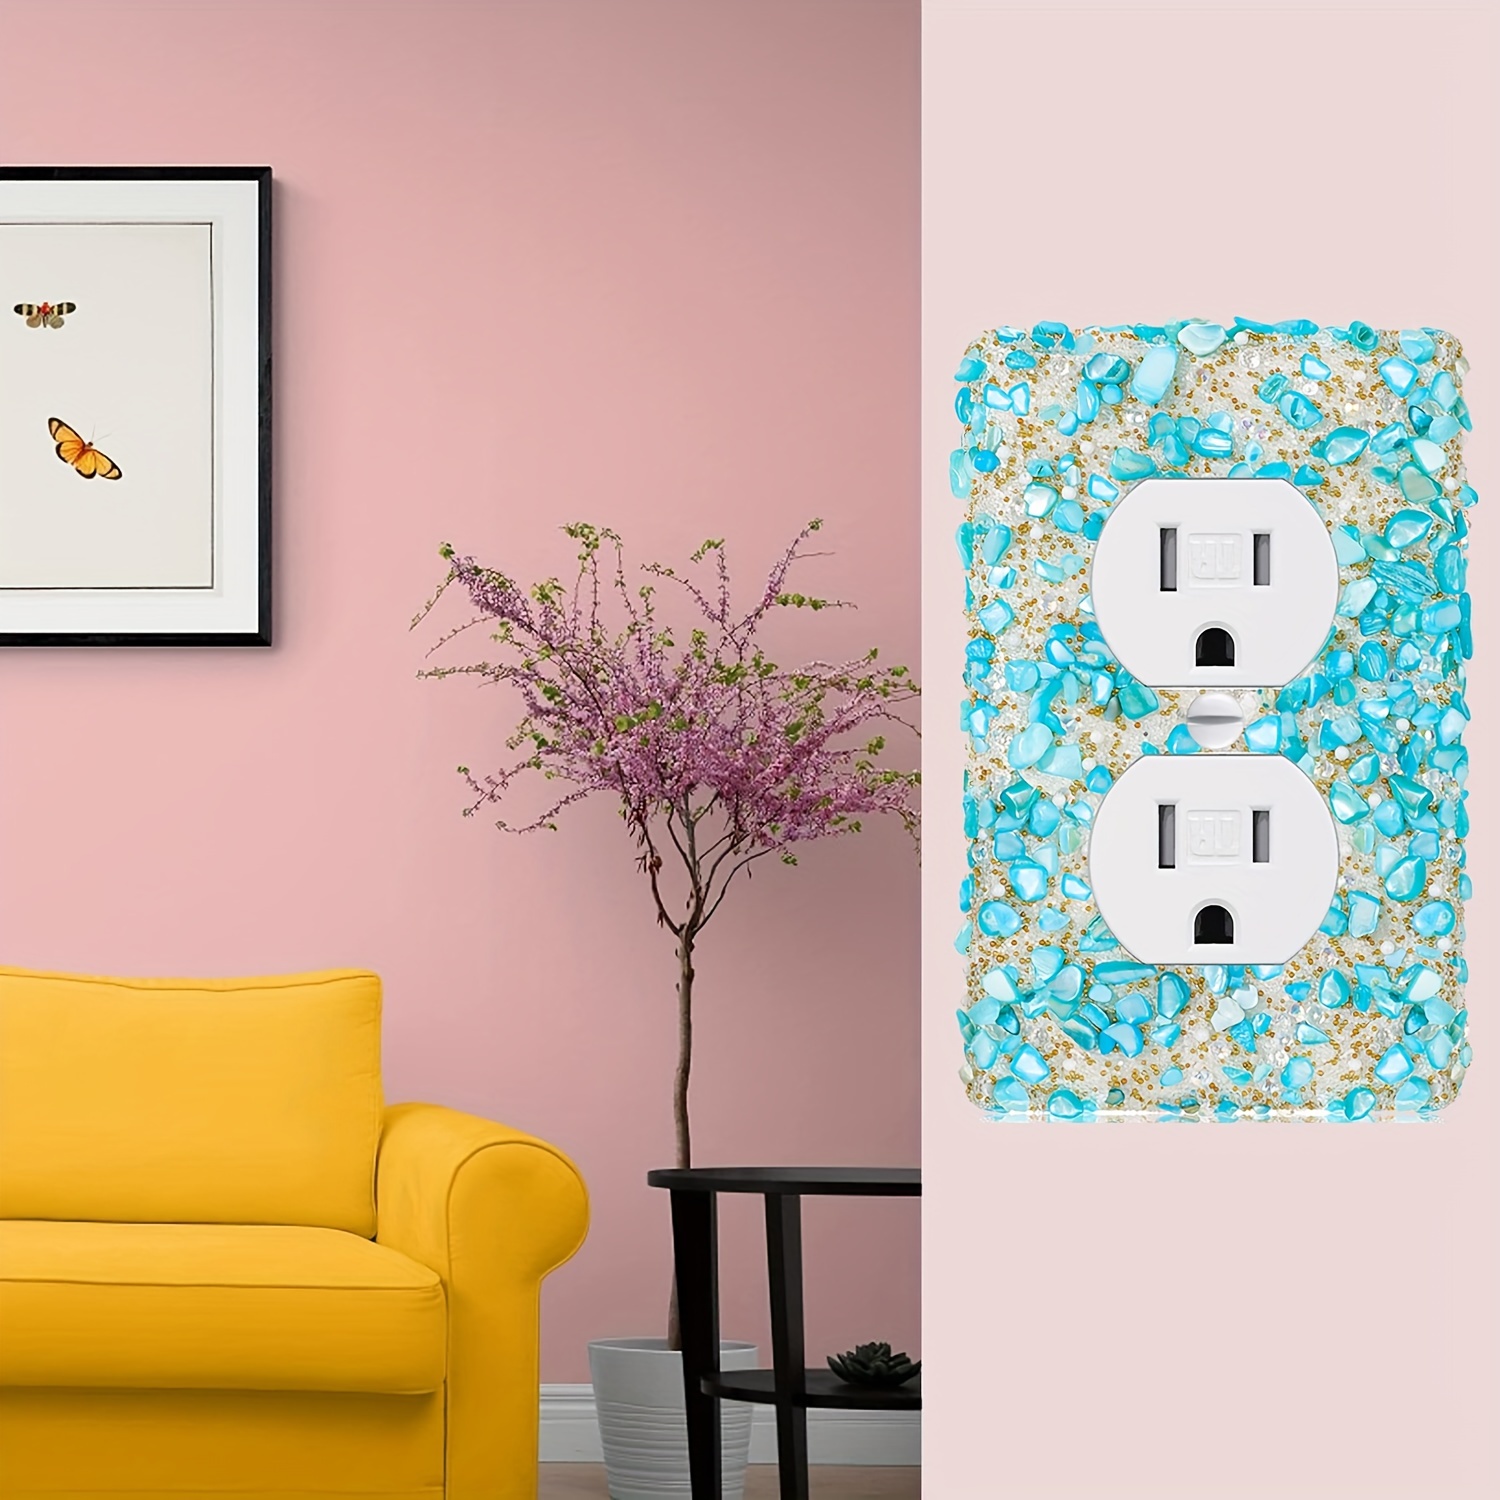 How to Paint Outlet Covers - The Turquoise Home